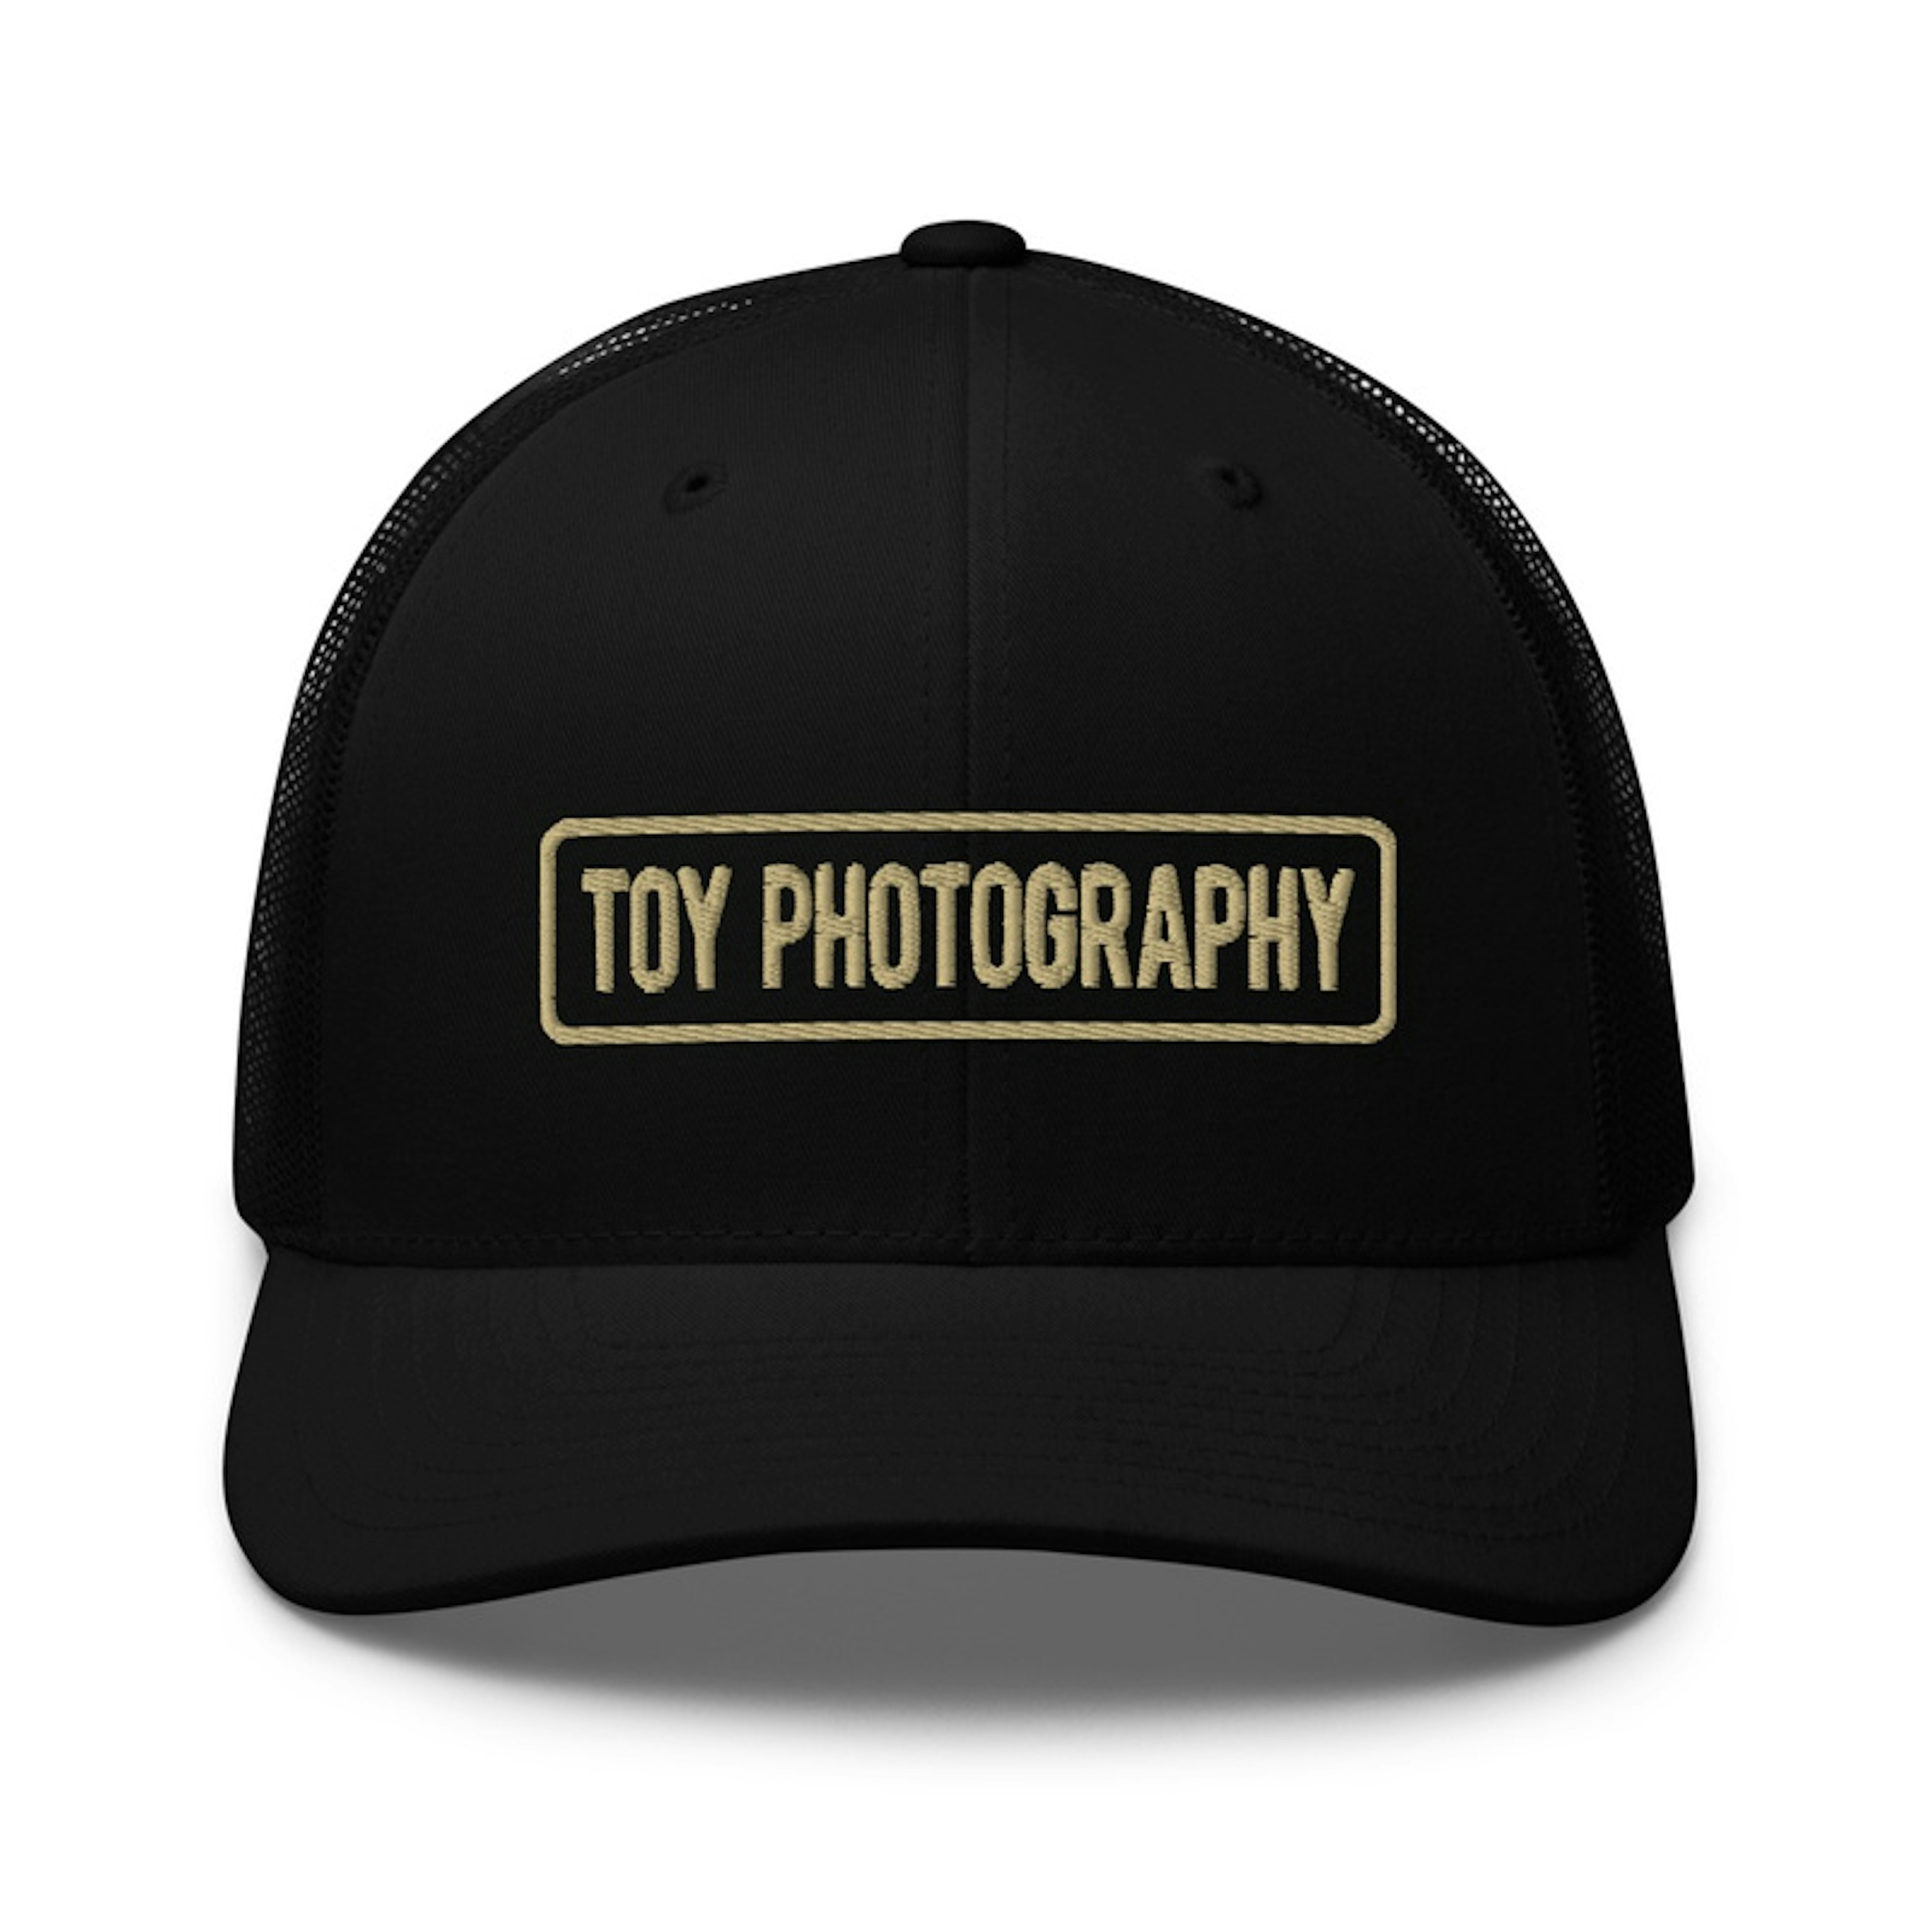 Toy Photography Trucker Hat